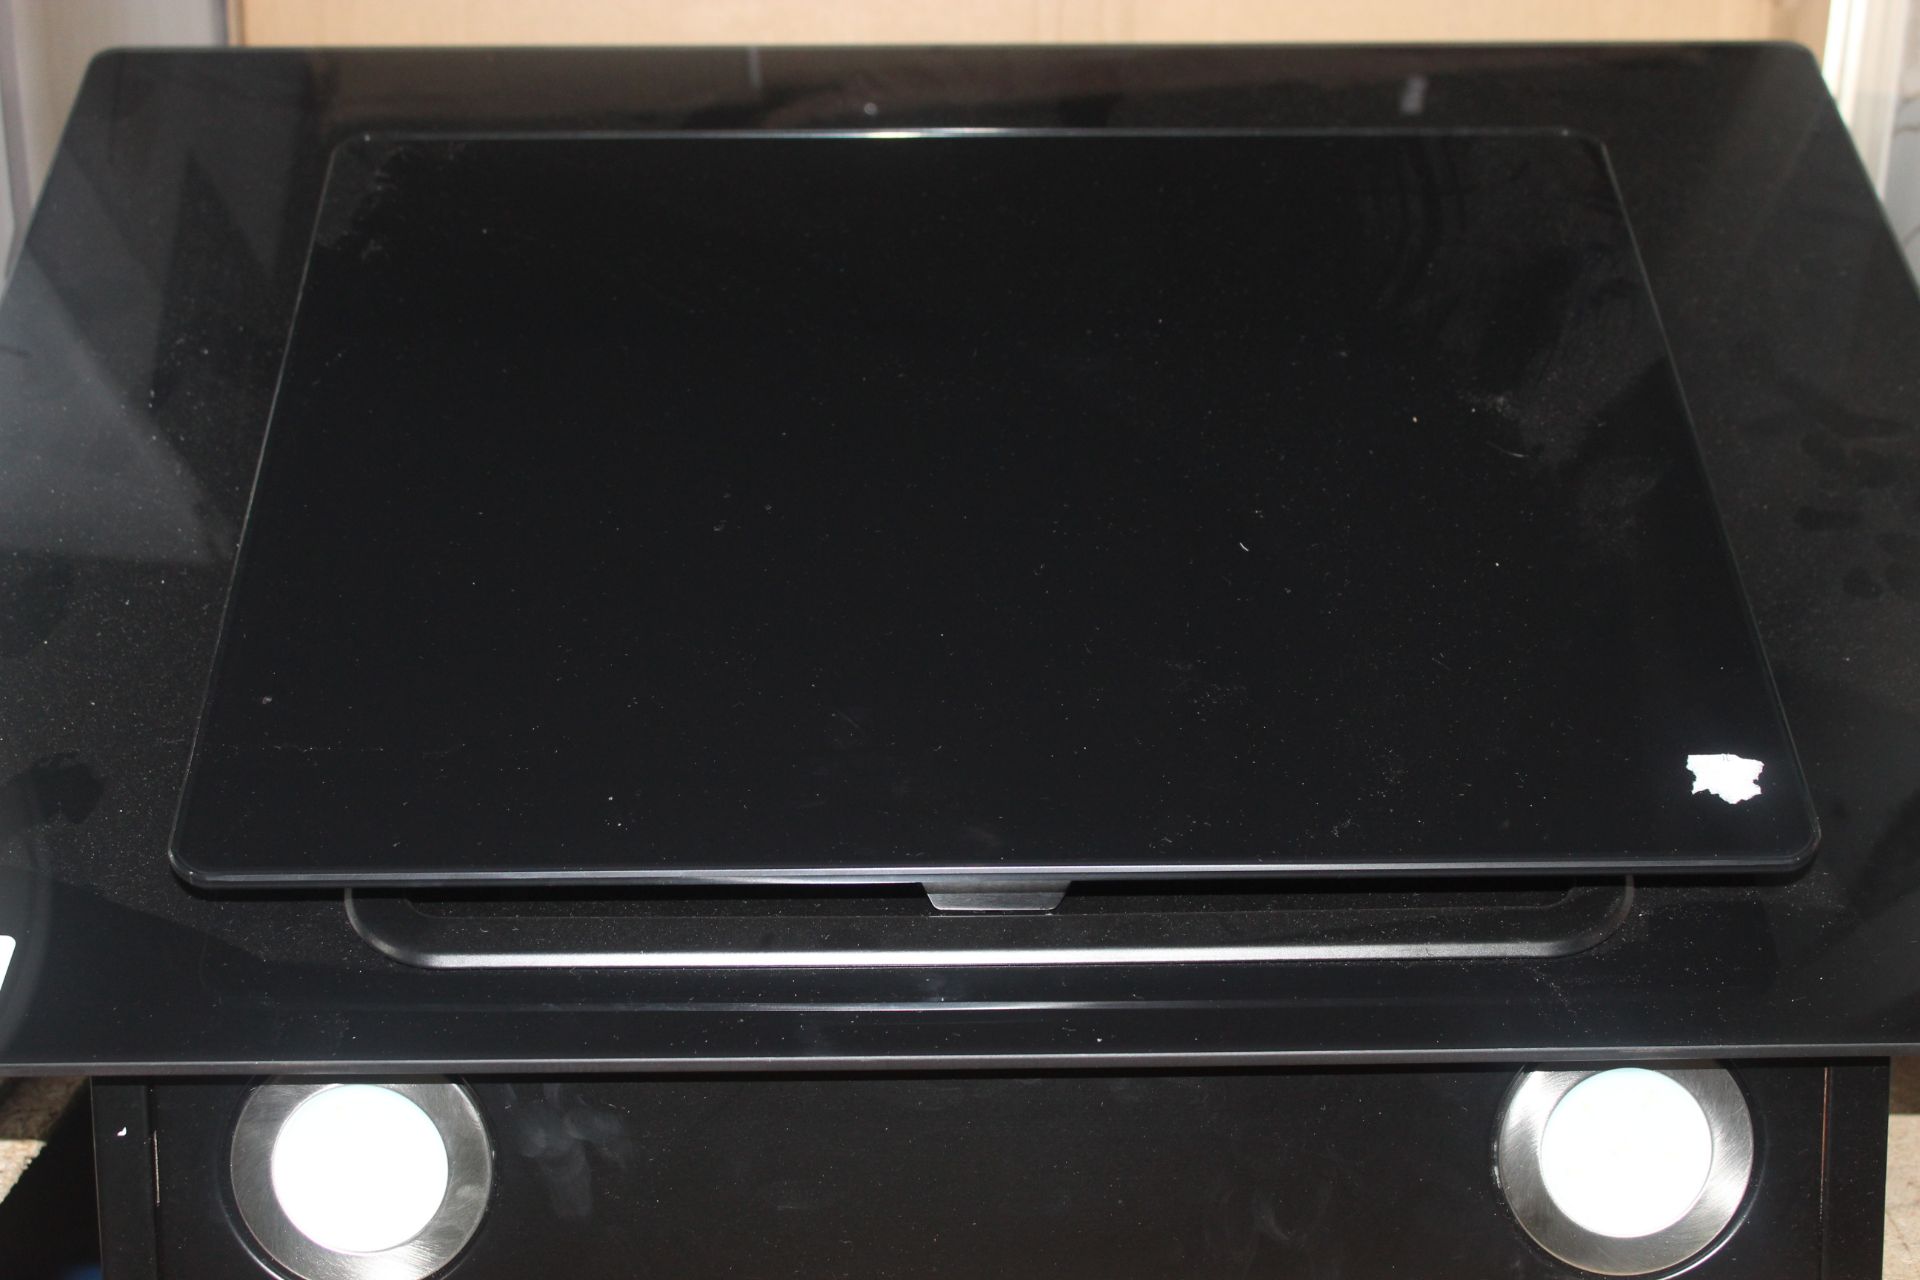 Boxed UBHHH60BK 60cm Angled Glass Cooker Hood With LED Lighting (Public Viewing and Appraisals